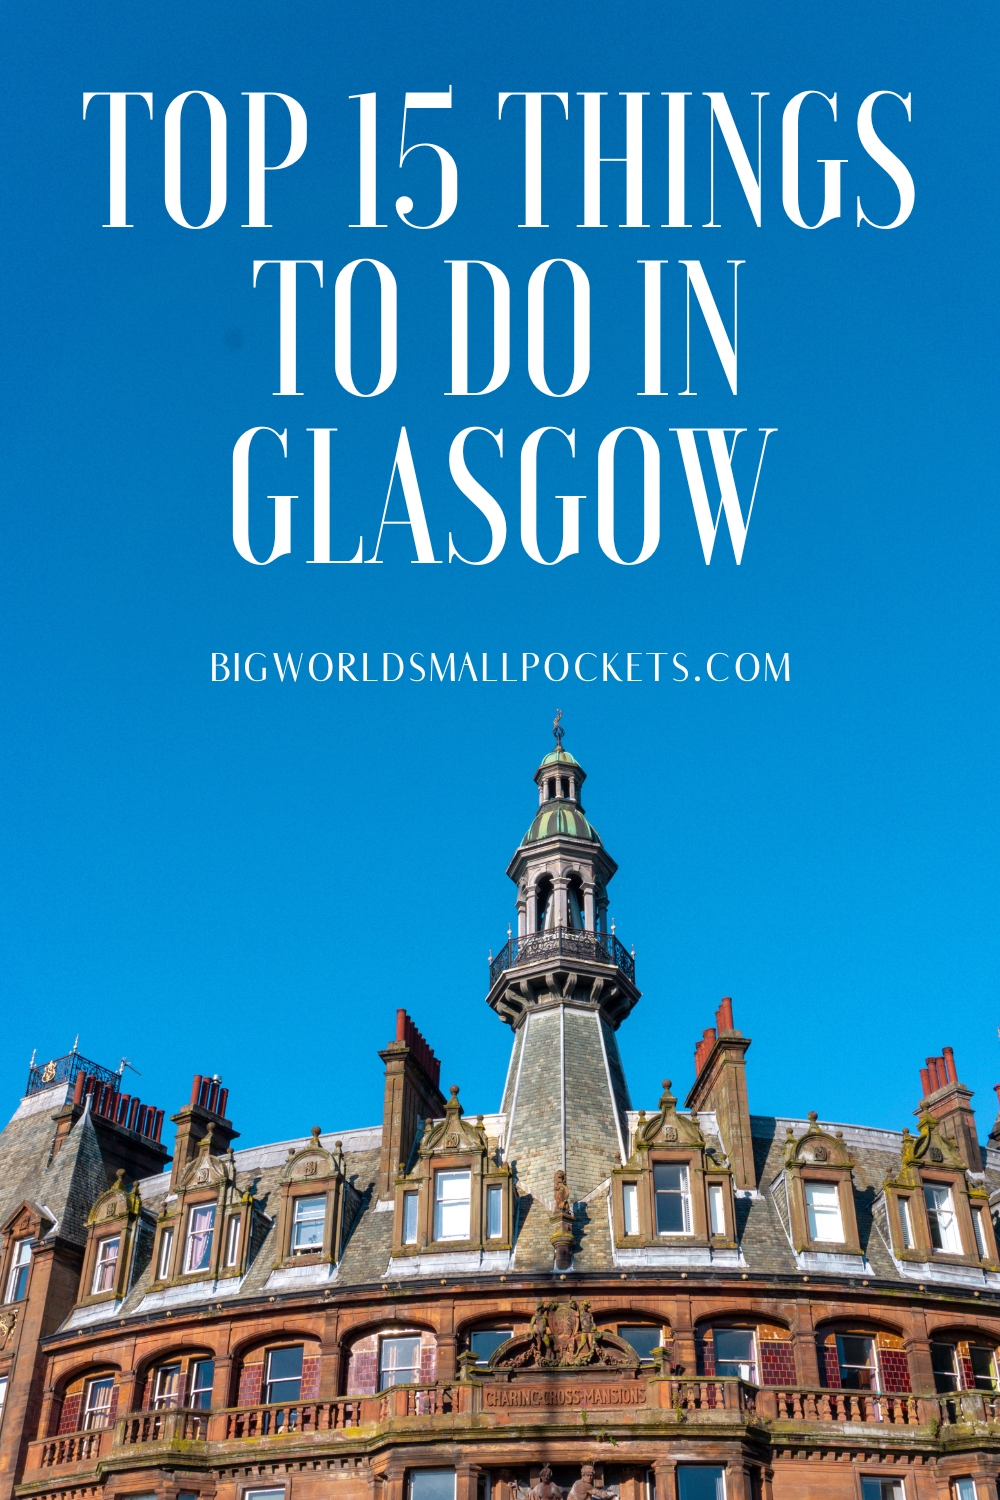 Top 15 Things to Do in Glasgow